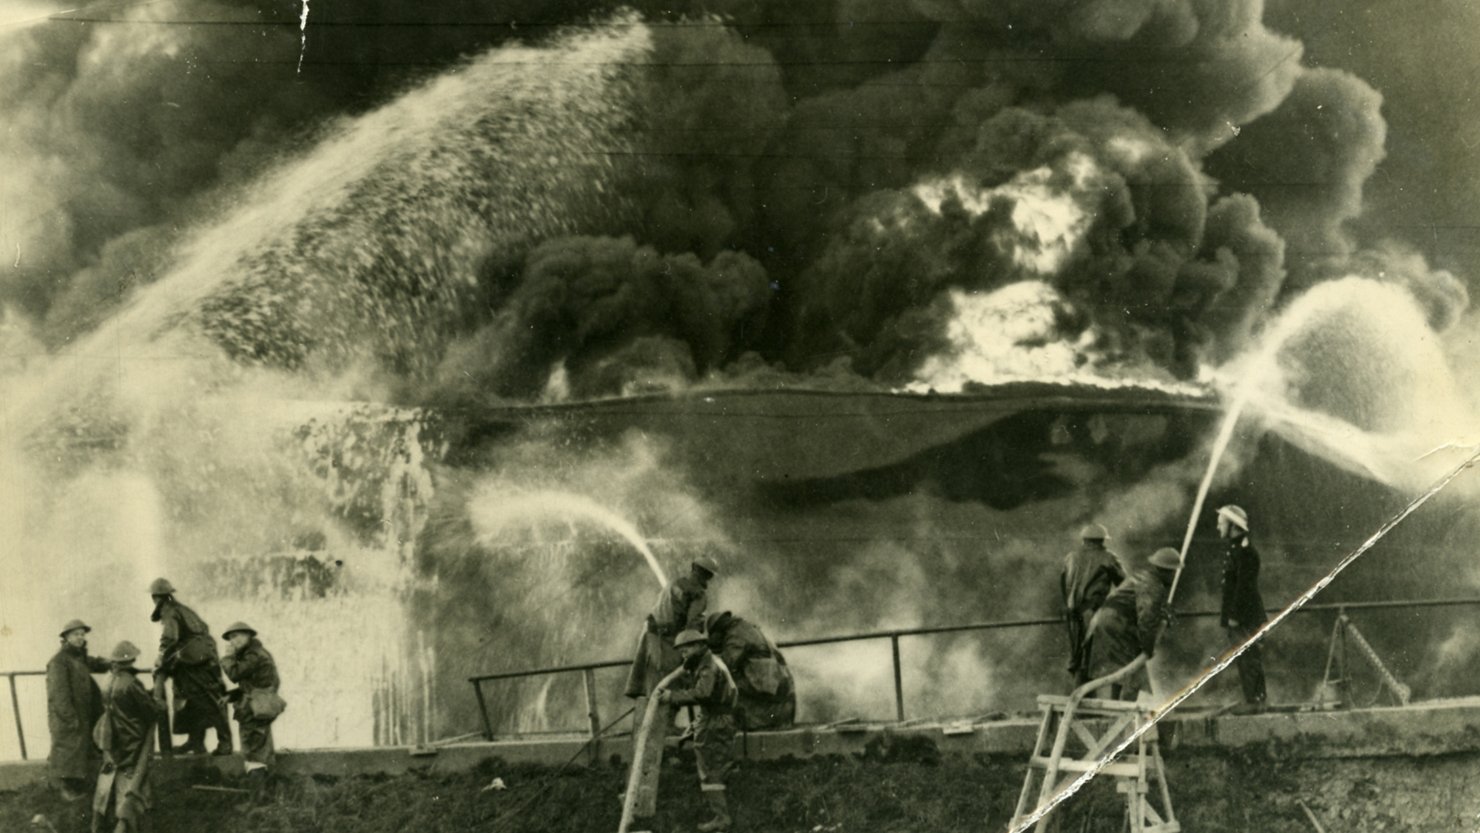 Firefighters during the Blitz in Plymstock, courtesy of The Box, Plymouth